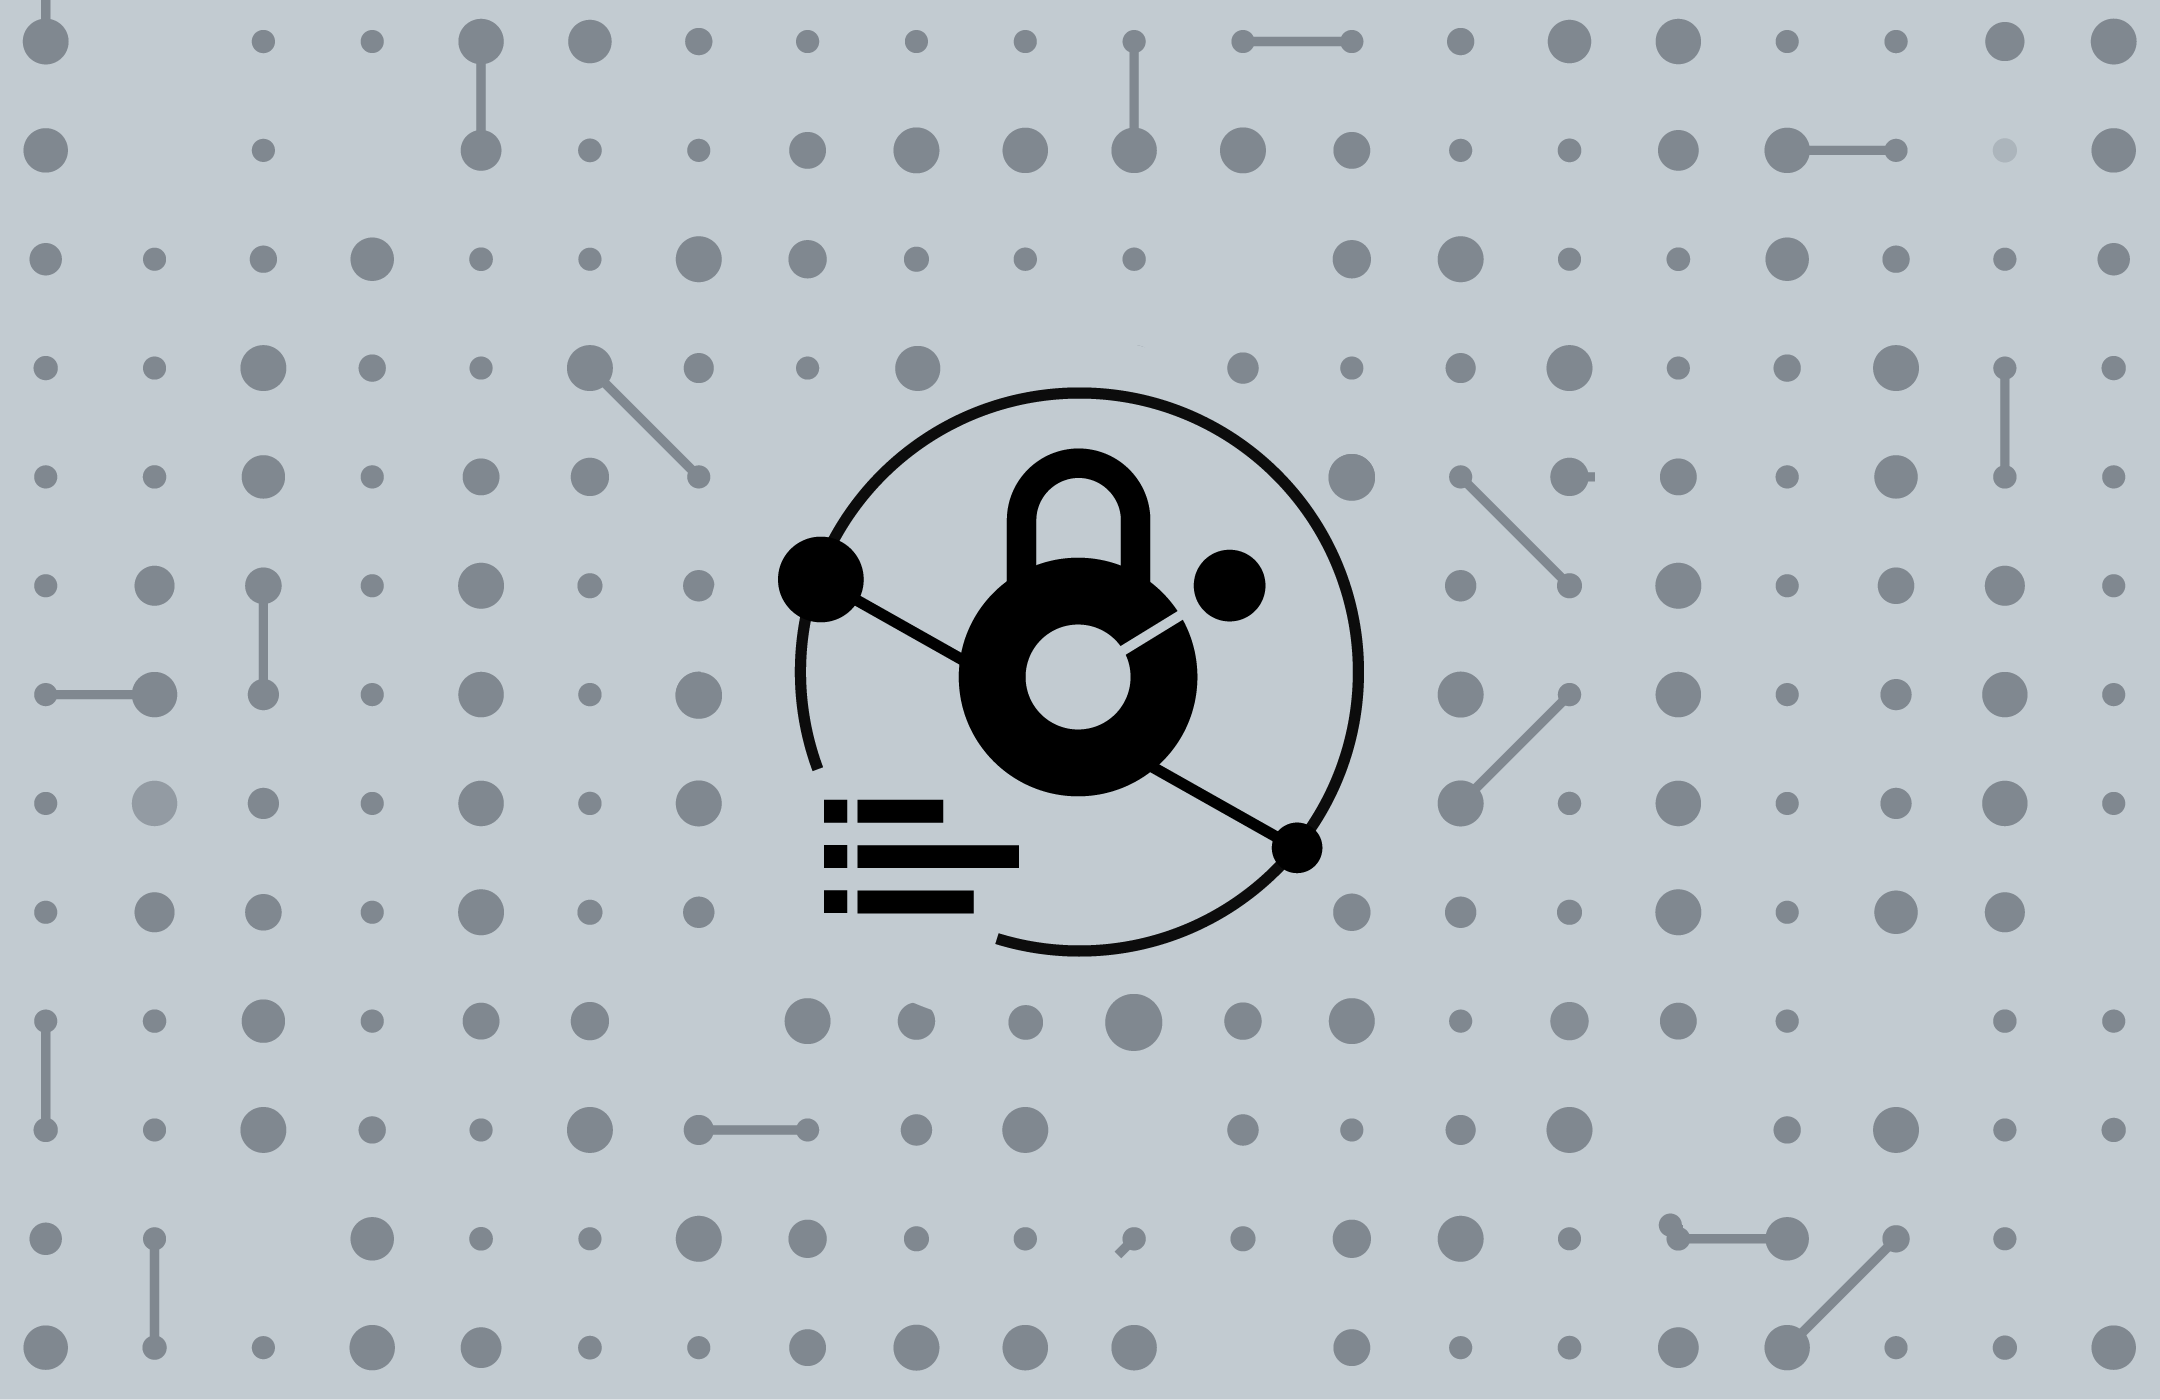 Lock icon against a gray background of lines and nodes